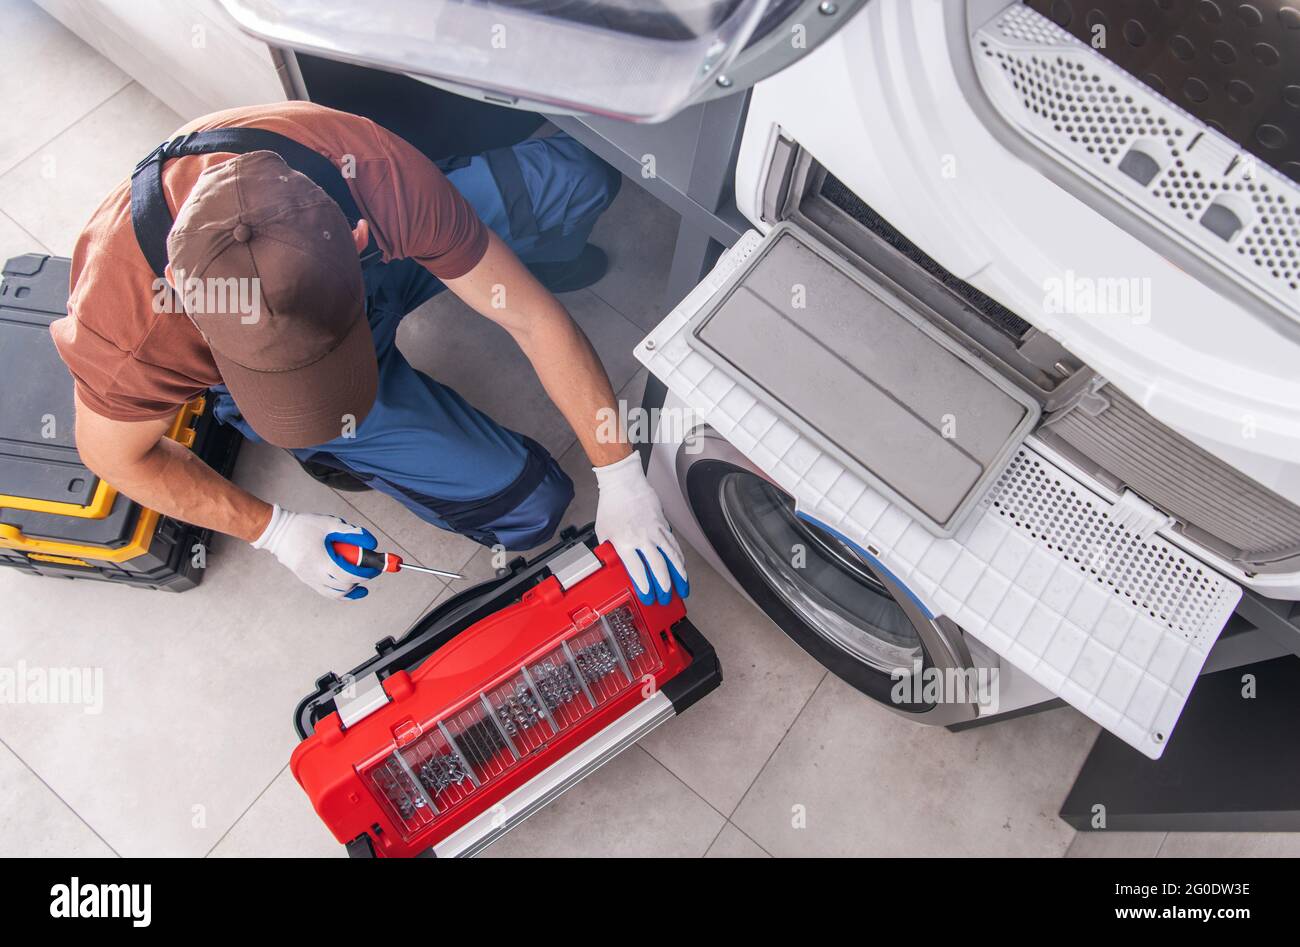 Residential Washing Machine Fixing by Caucasian Professional Technician. Home Appliances Issues Theme. Stock Photo